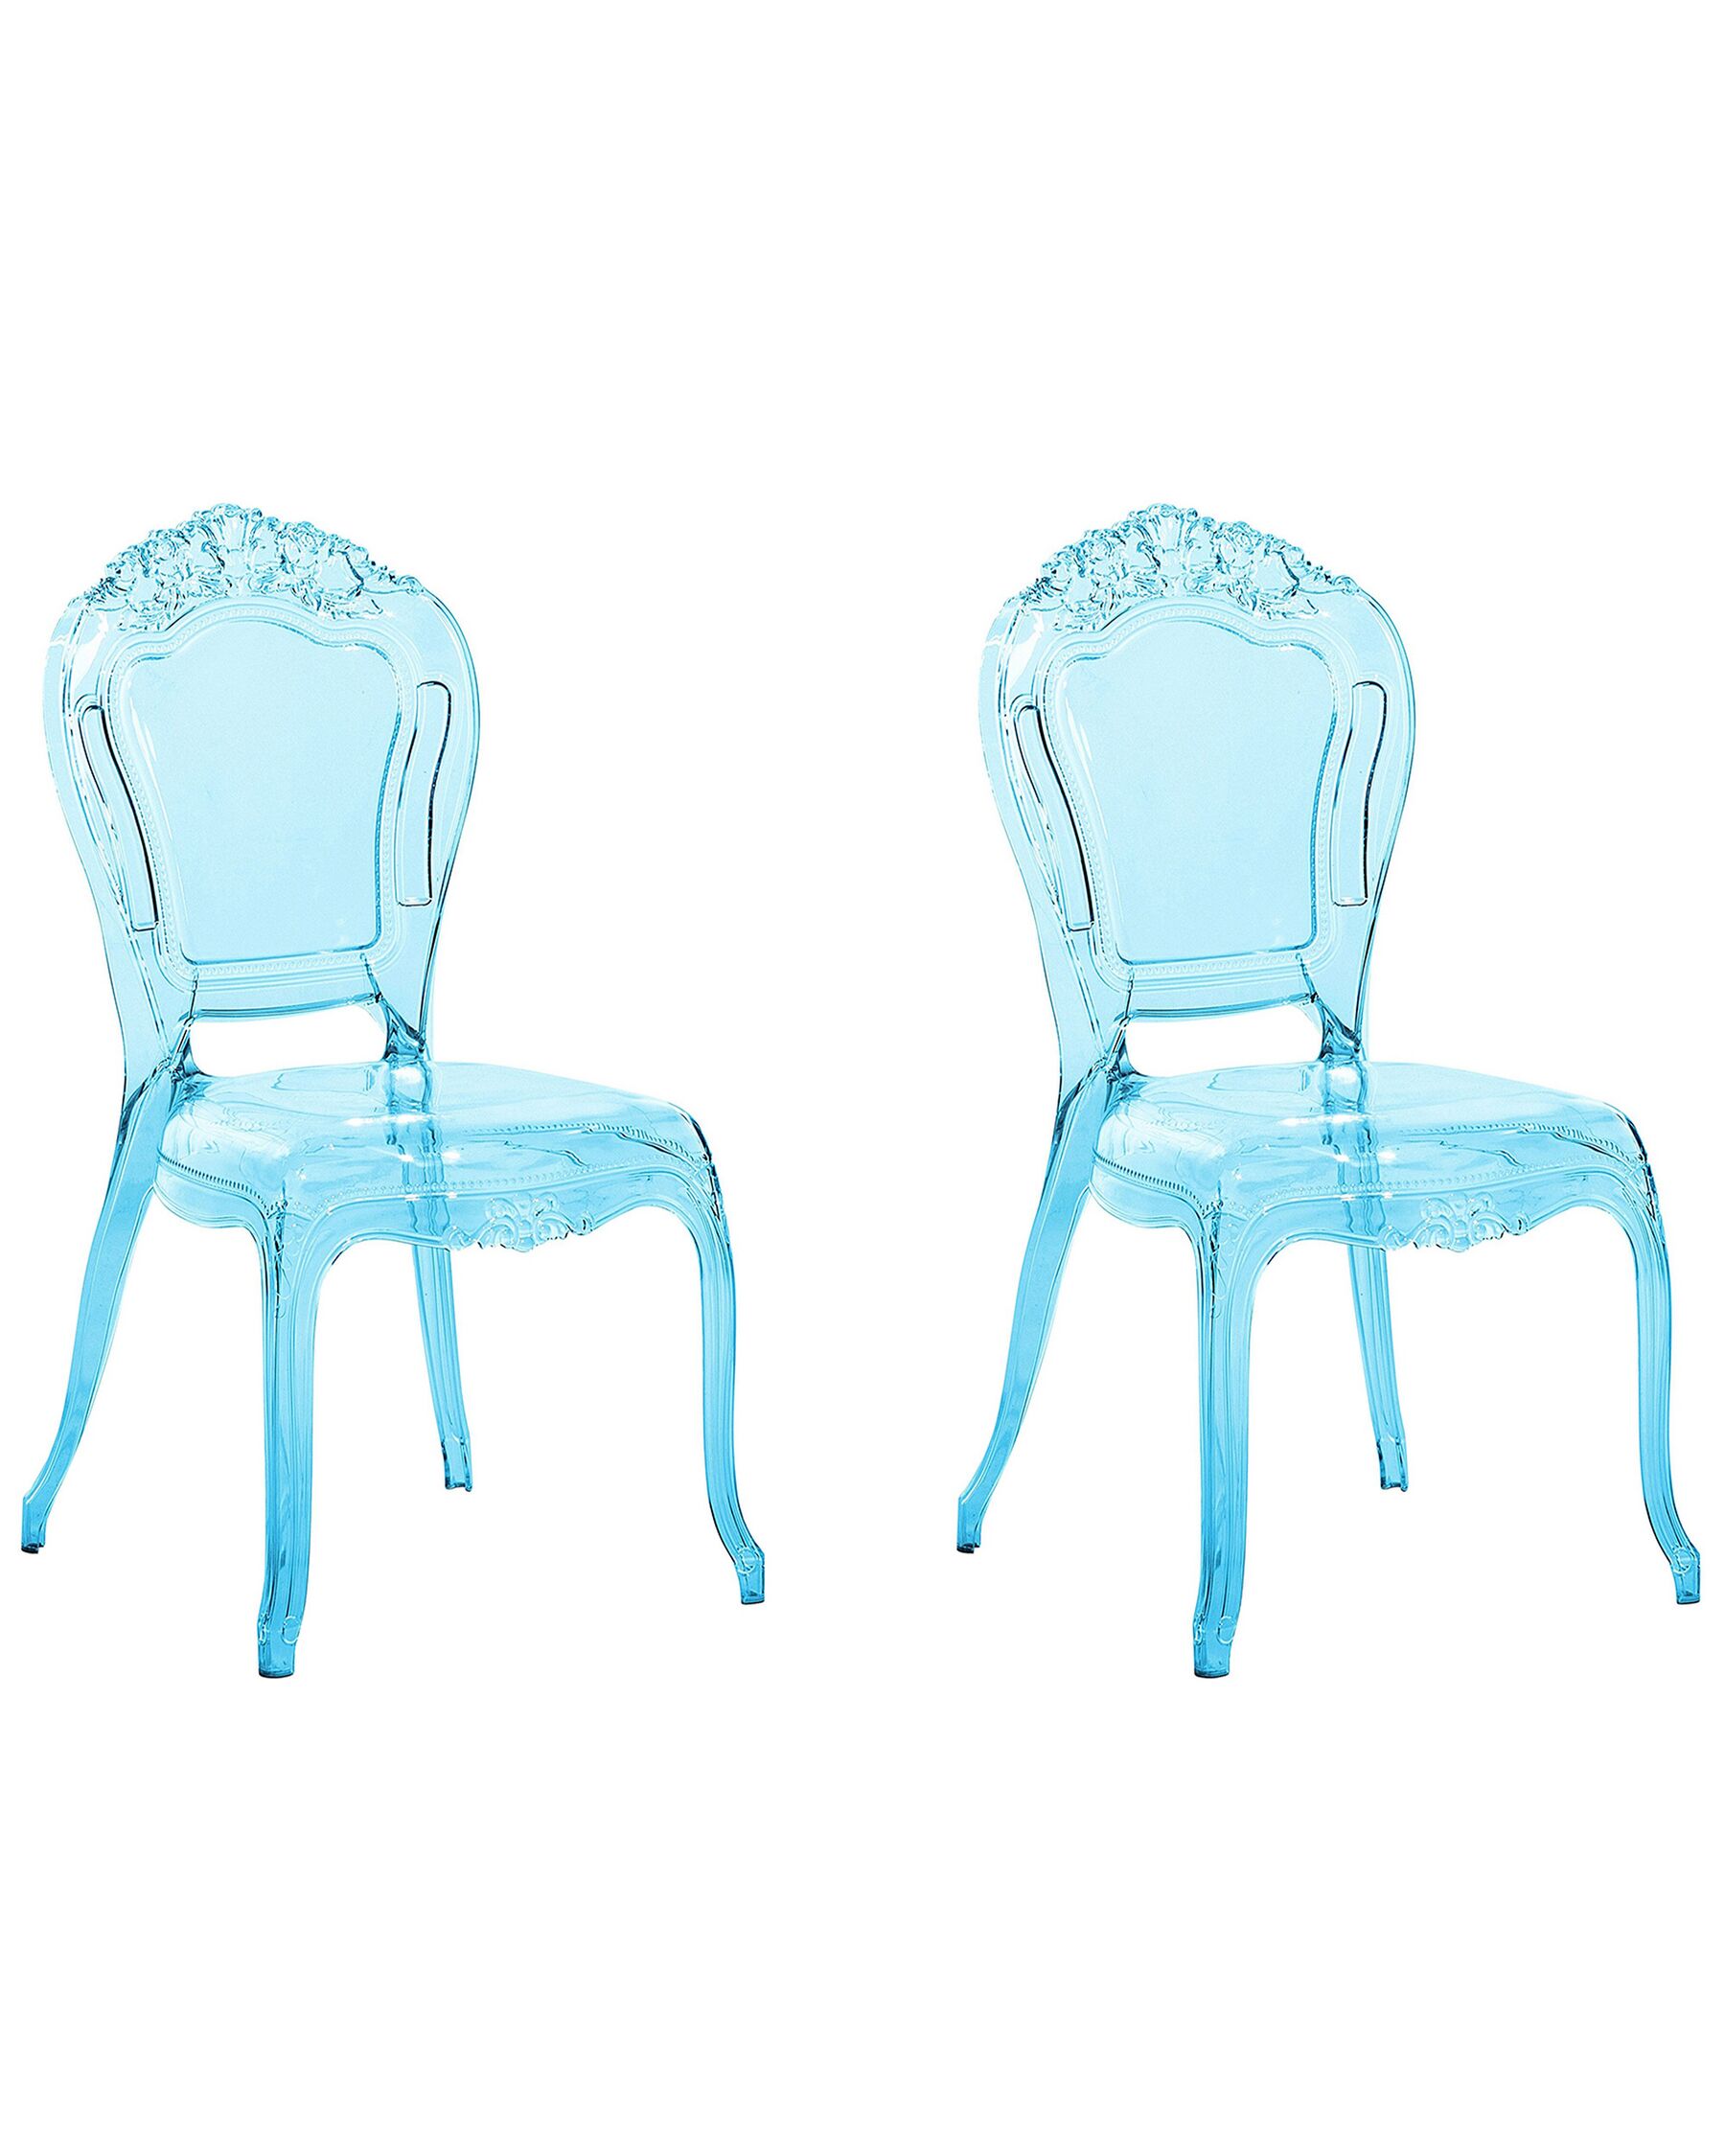 Set of 2 Accent Chairs Acrylic Transparent Blue VERMONT_691838